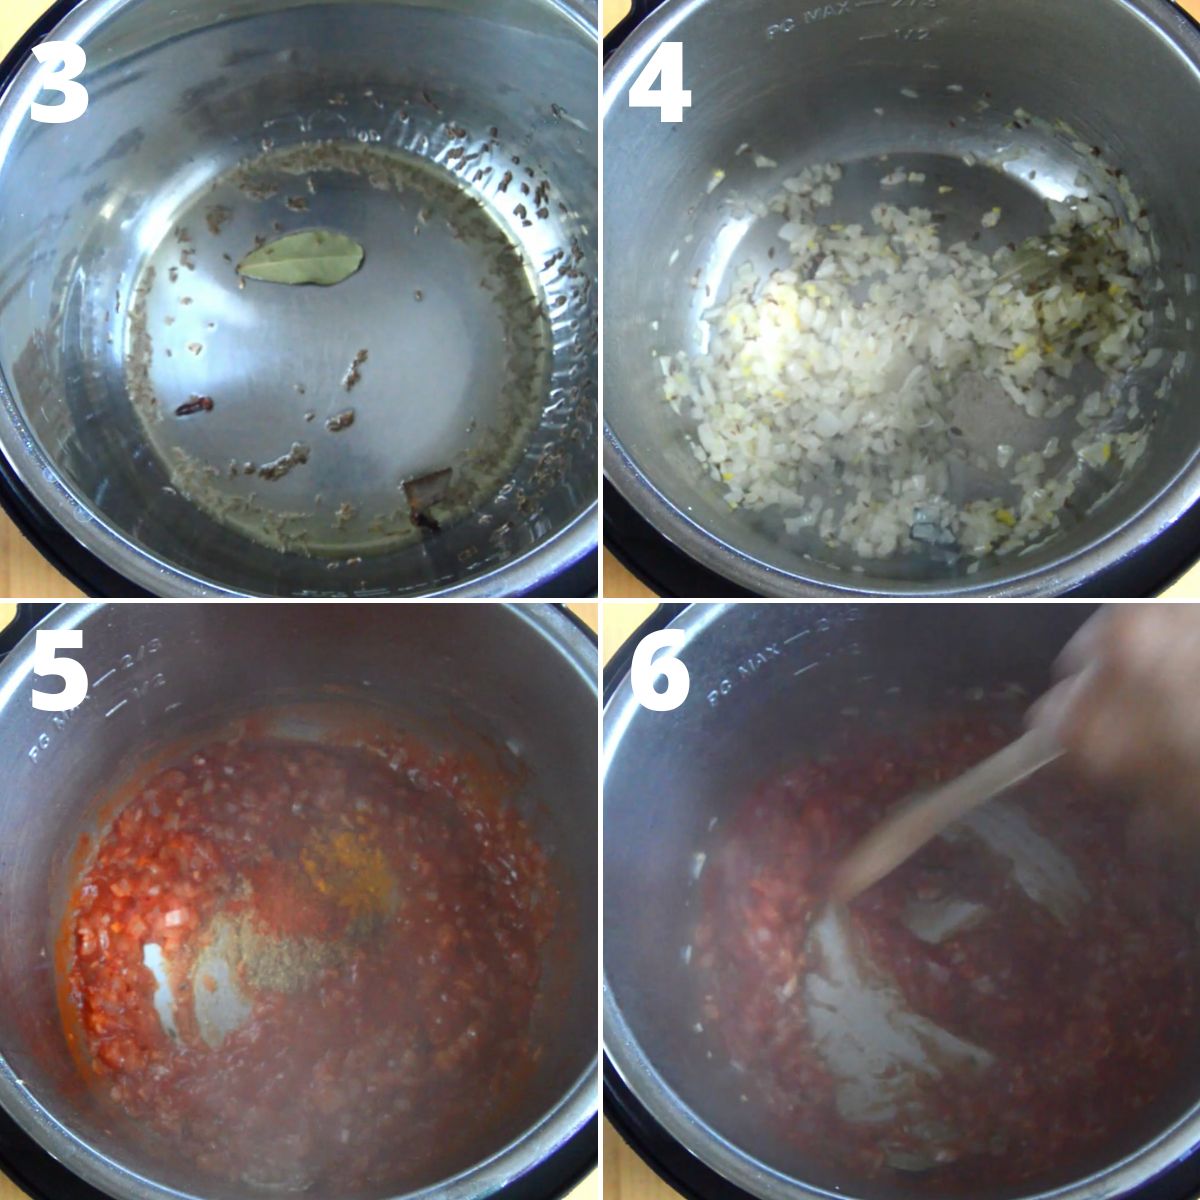 collage of 4 images showing the process of frying whole spices and cooking vegetables along with dry spices in a inner steel pot of instant pot.